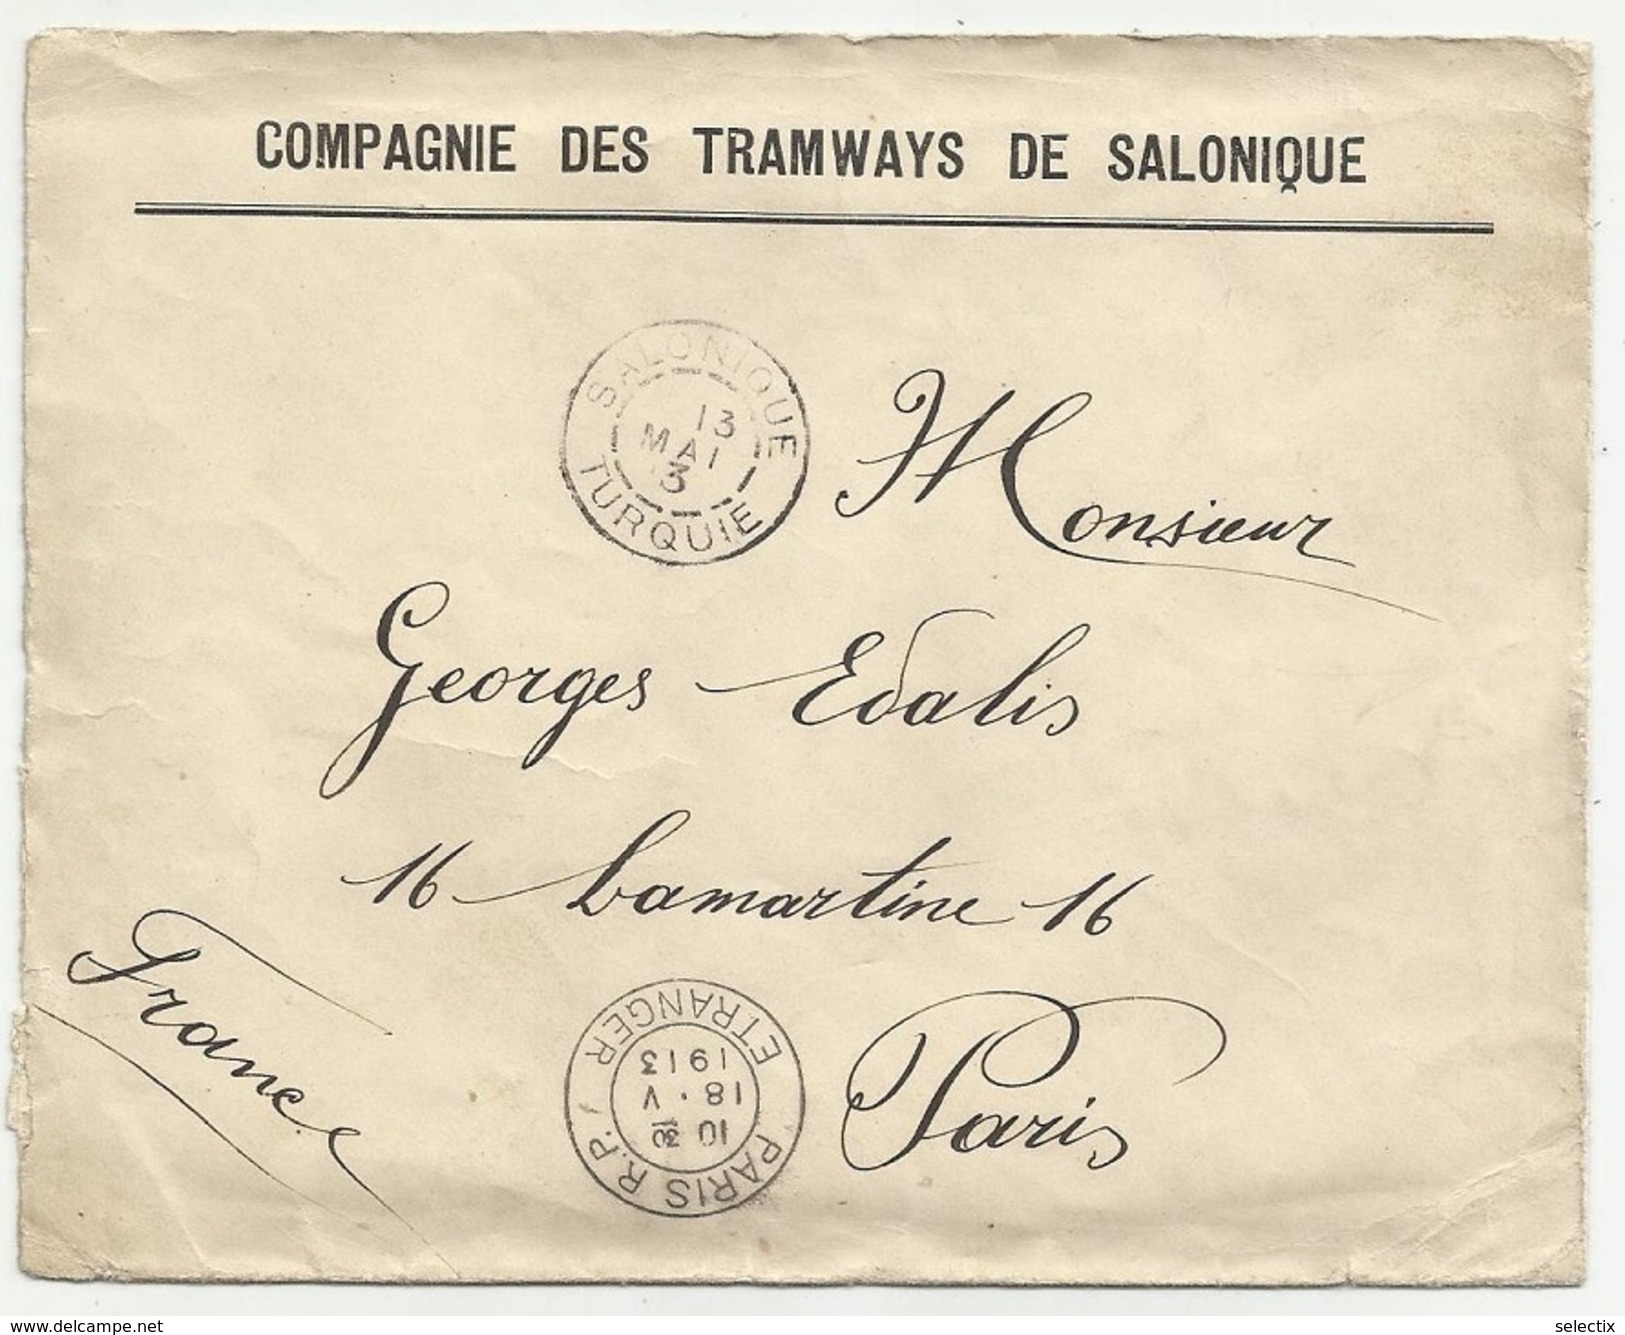 Greece 1913 French Post Office In Salonique During Ottoman Occupation - Thessaloniki